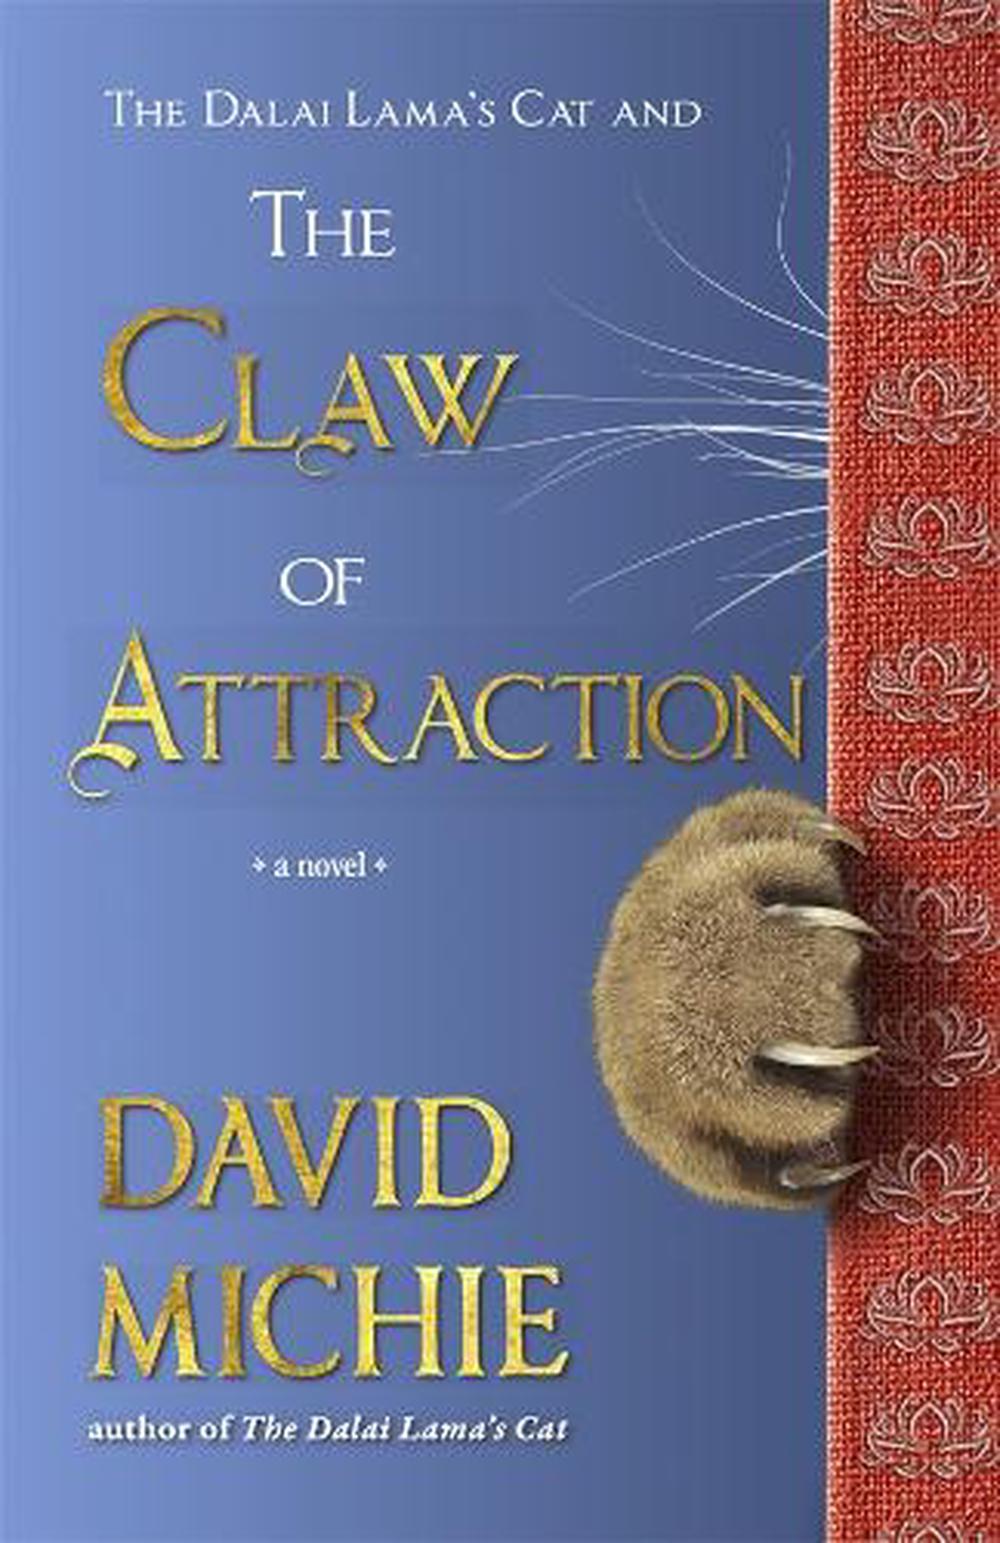 The Dalai Lama's Cat and the Claw of Attraction - Rivendell Shop